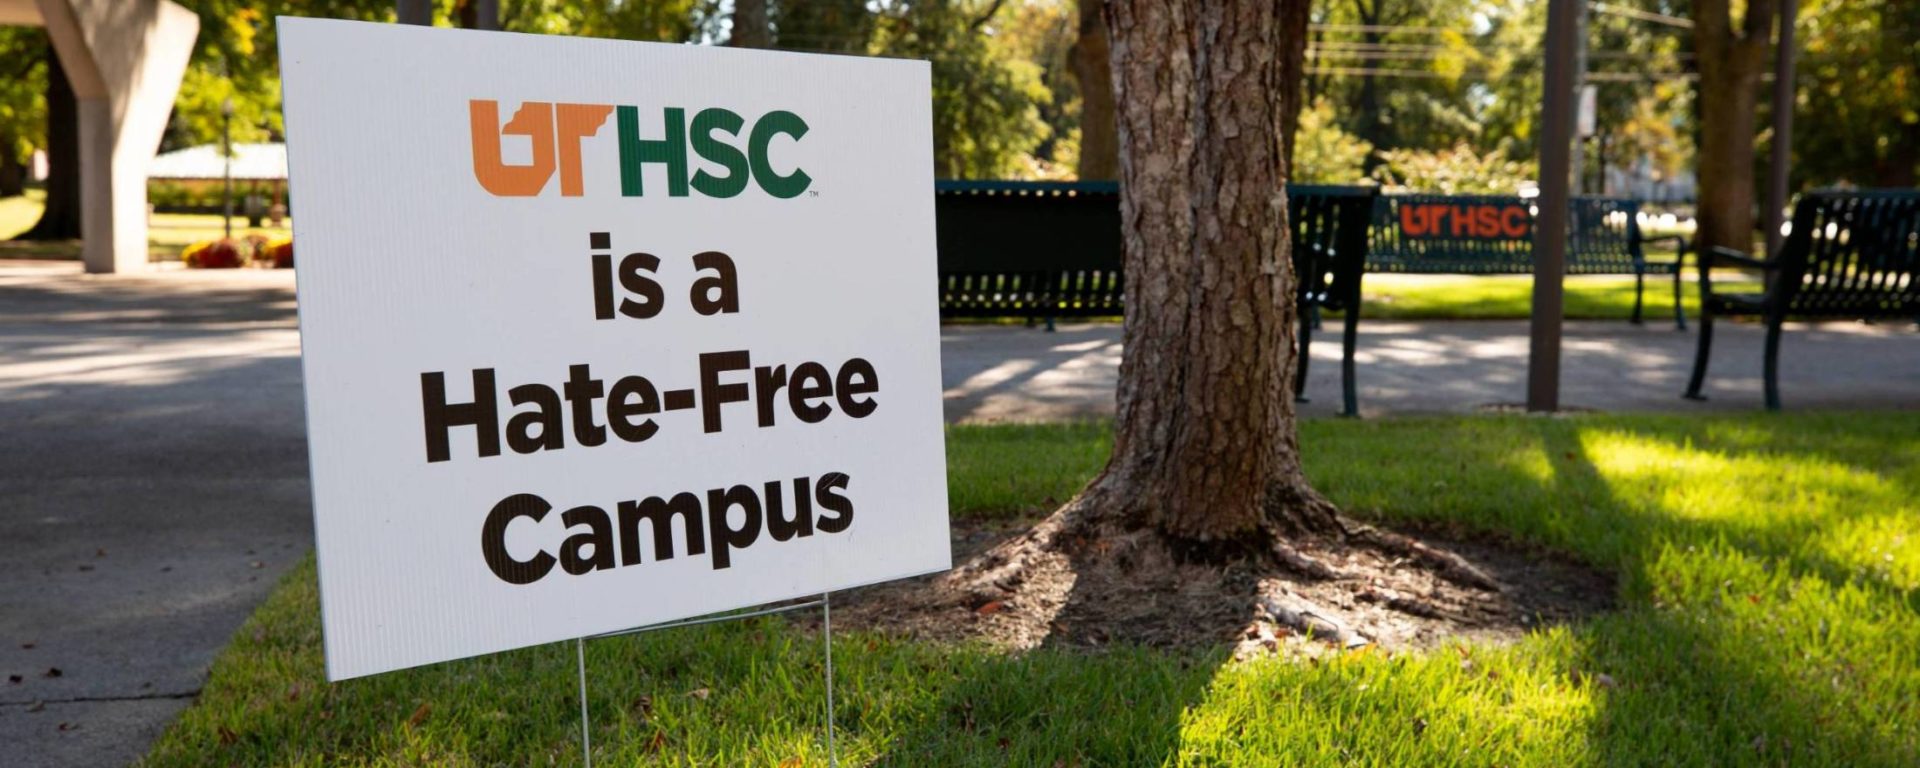 anti-hate yard sign reads "UTHSC is a Hate-Free Campus"